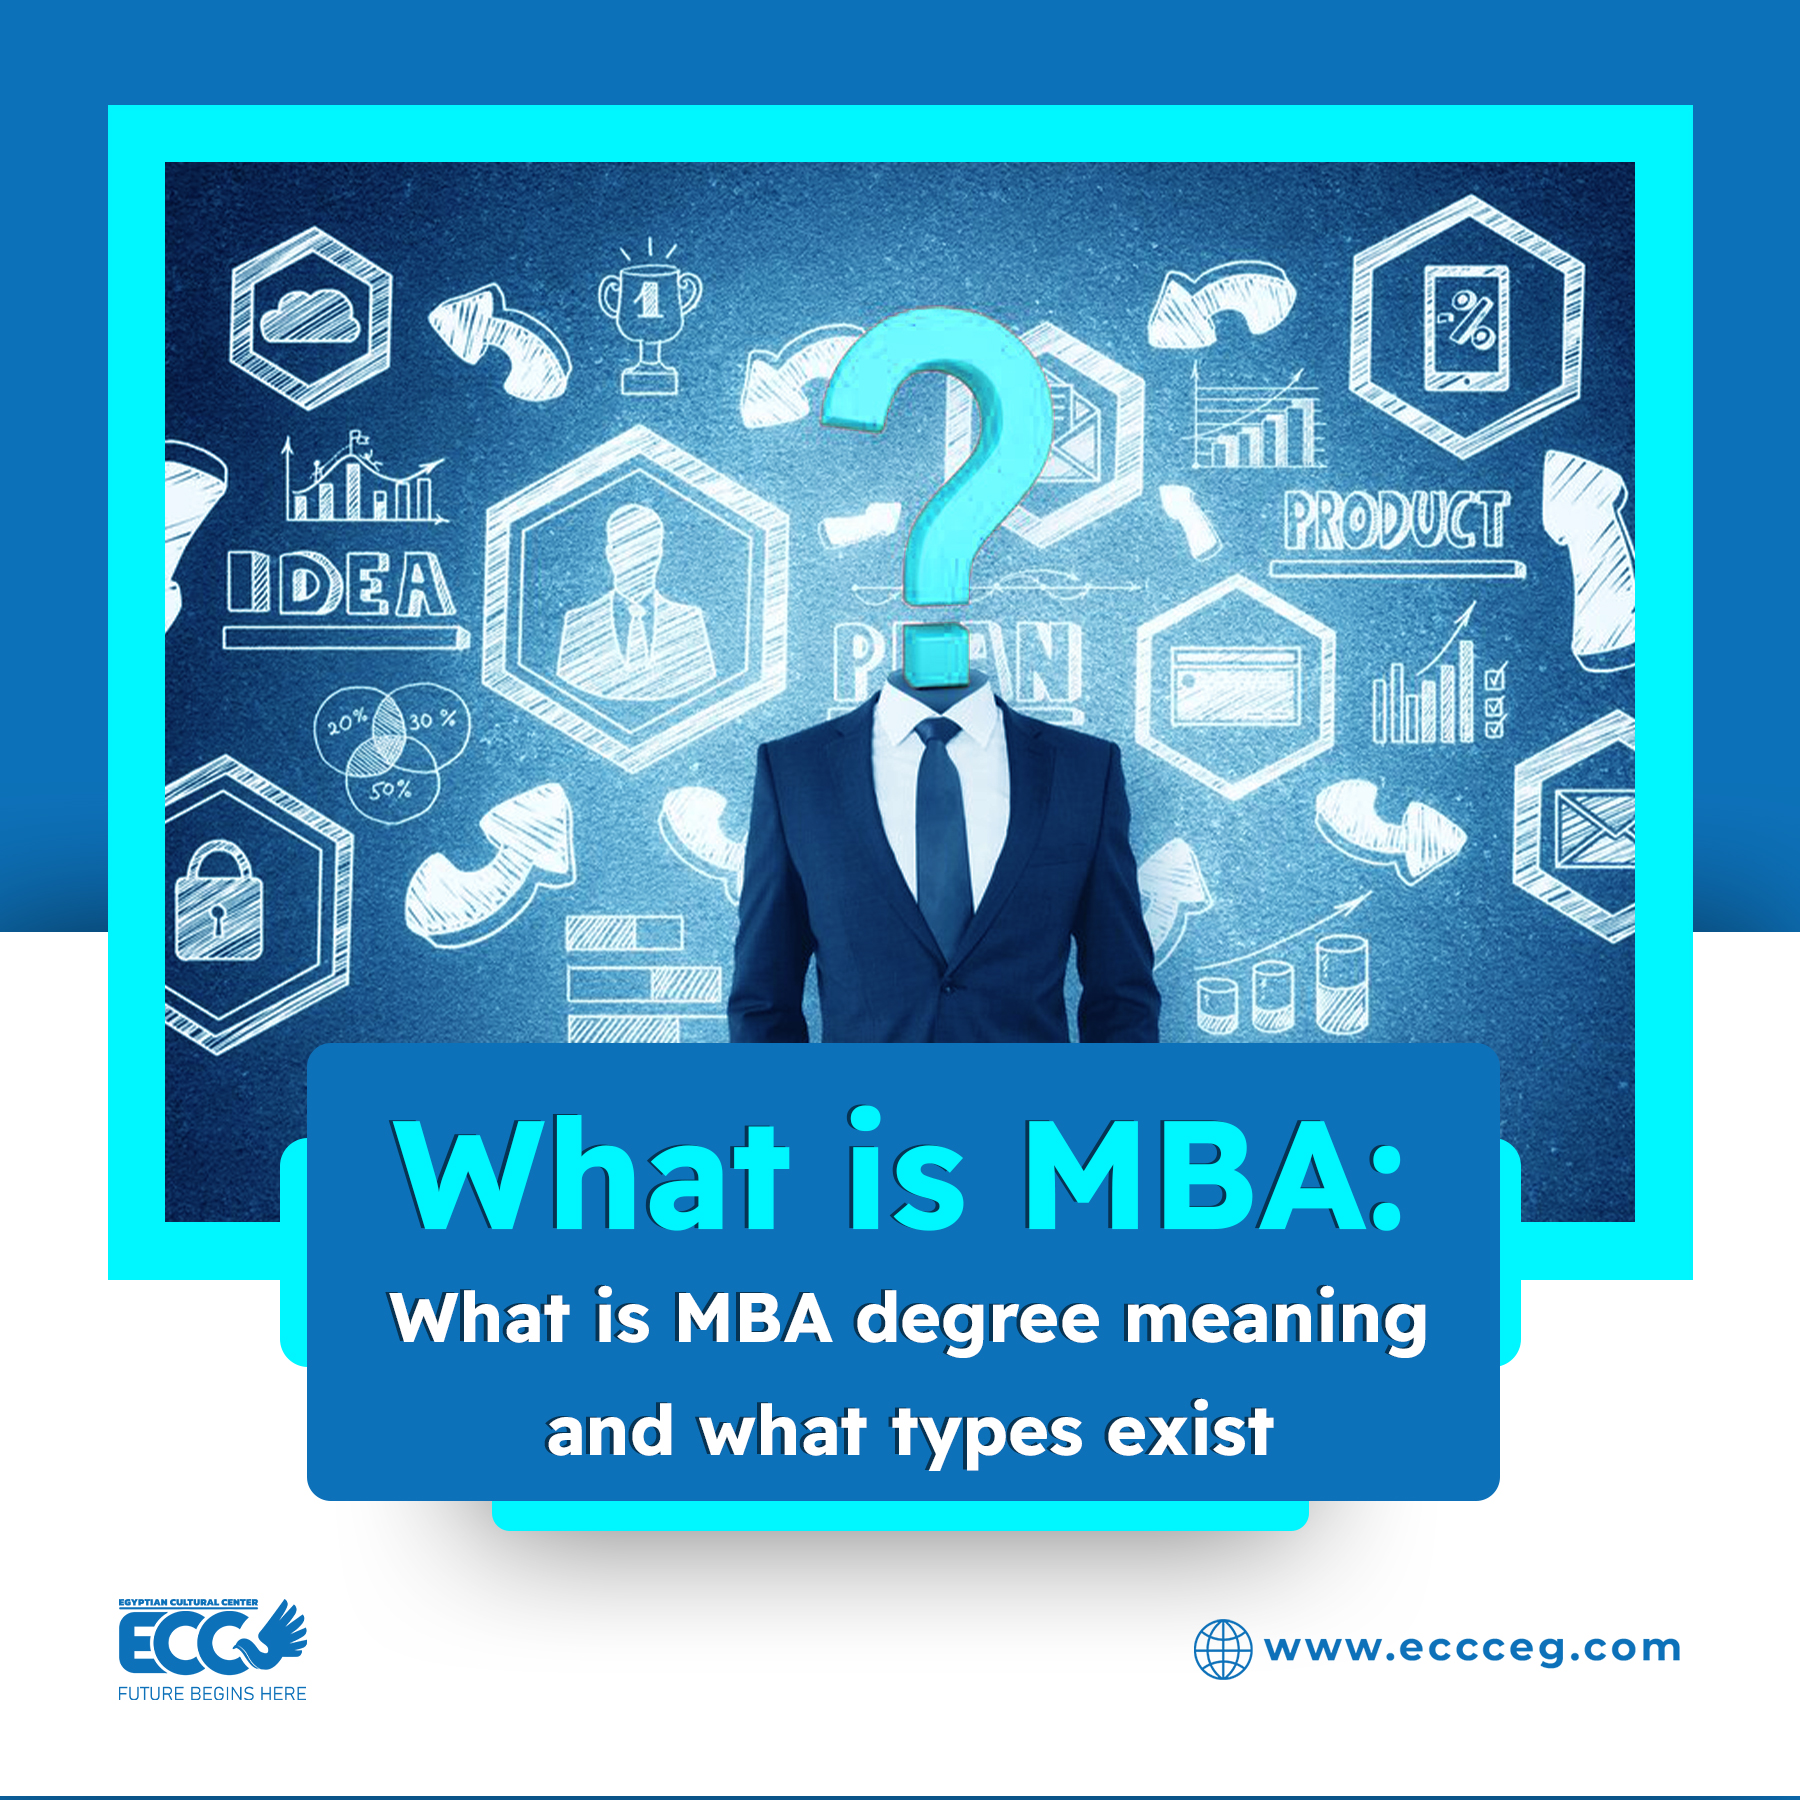 What is MBA degree meaning and what types exist